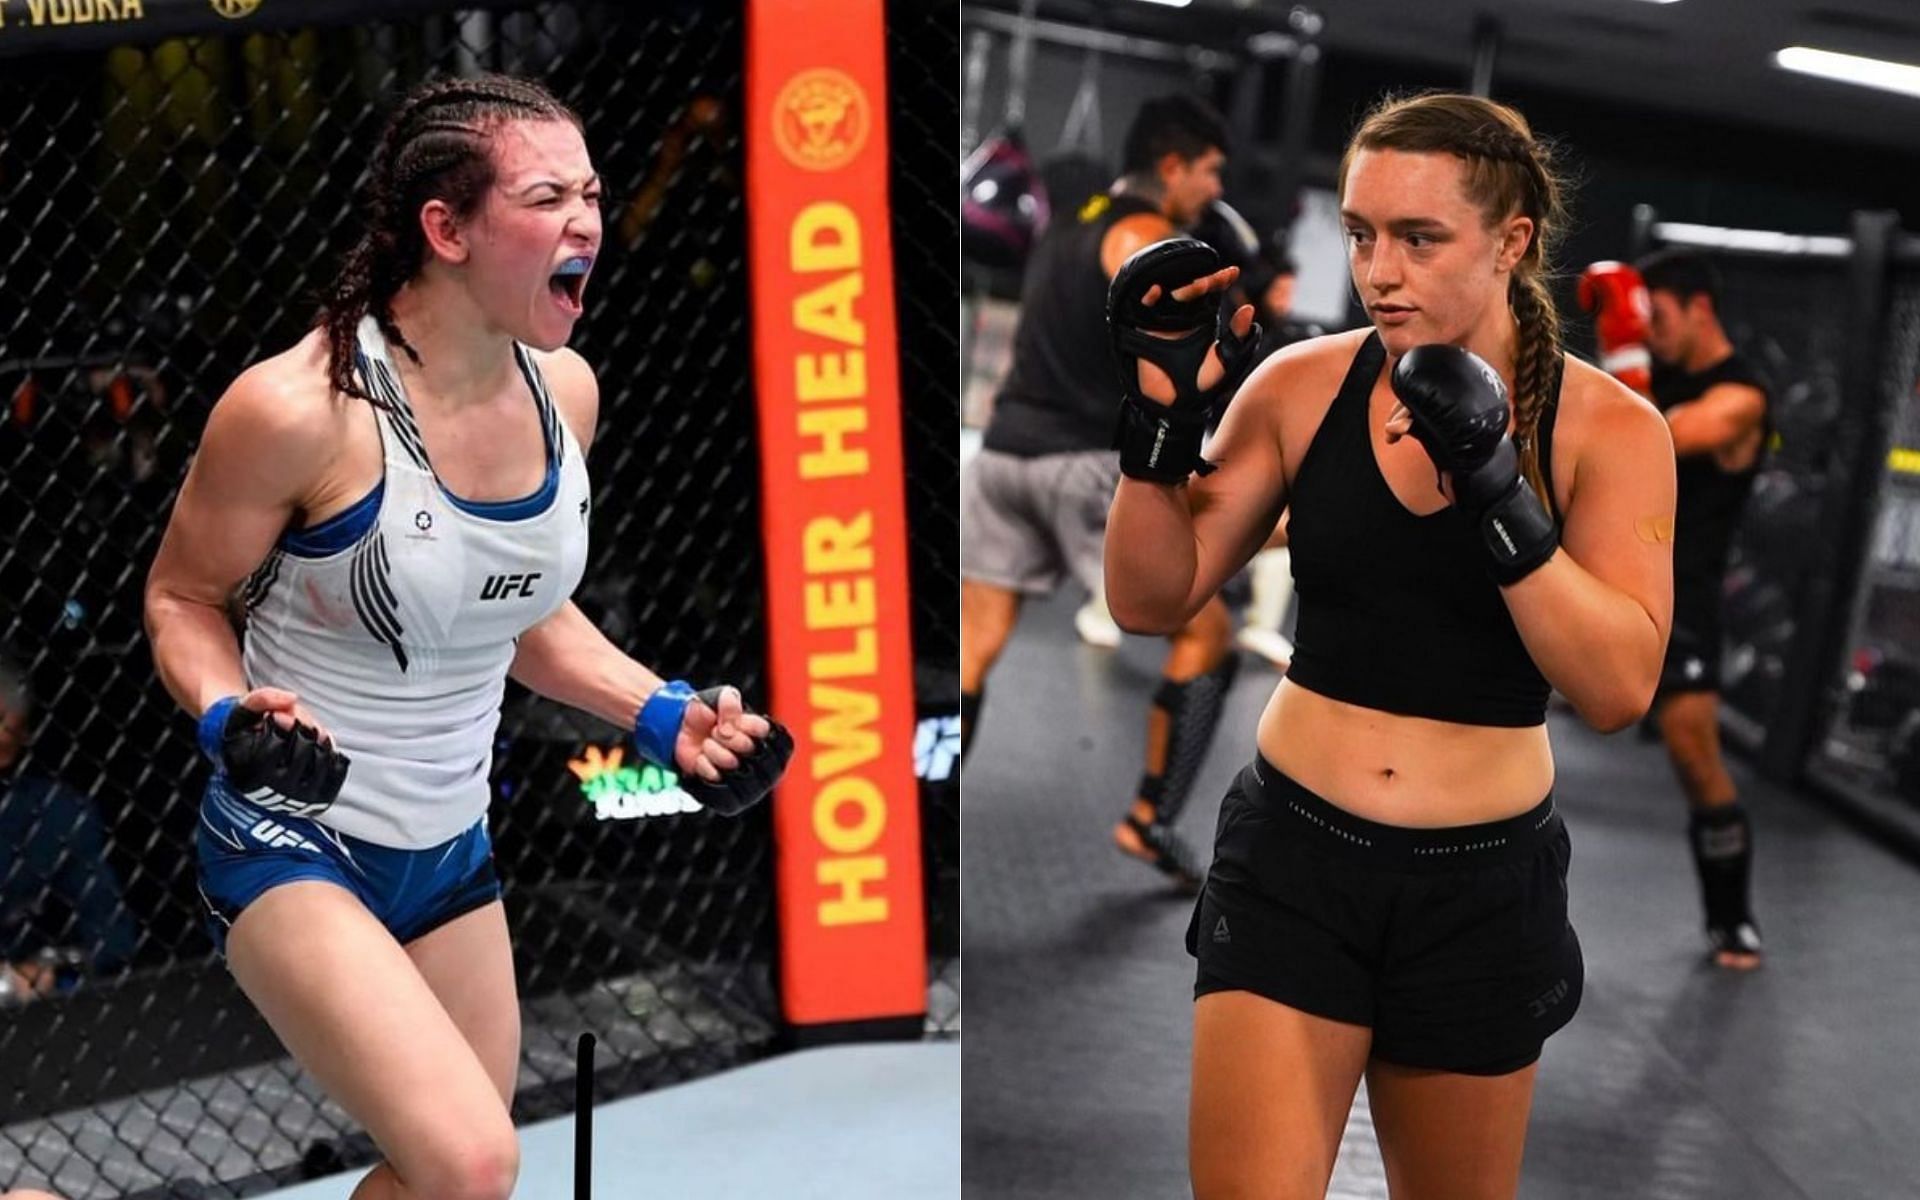 Miesha Tate (left) and Aspen Ladd (right) [Images Courtesy: @mieshatate and @aspenladd on Instagram]